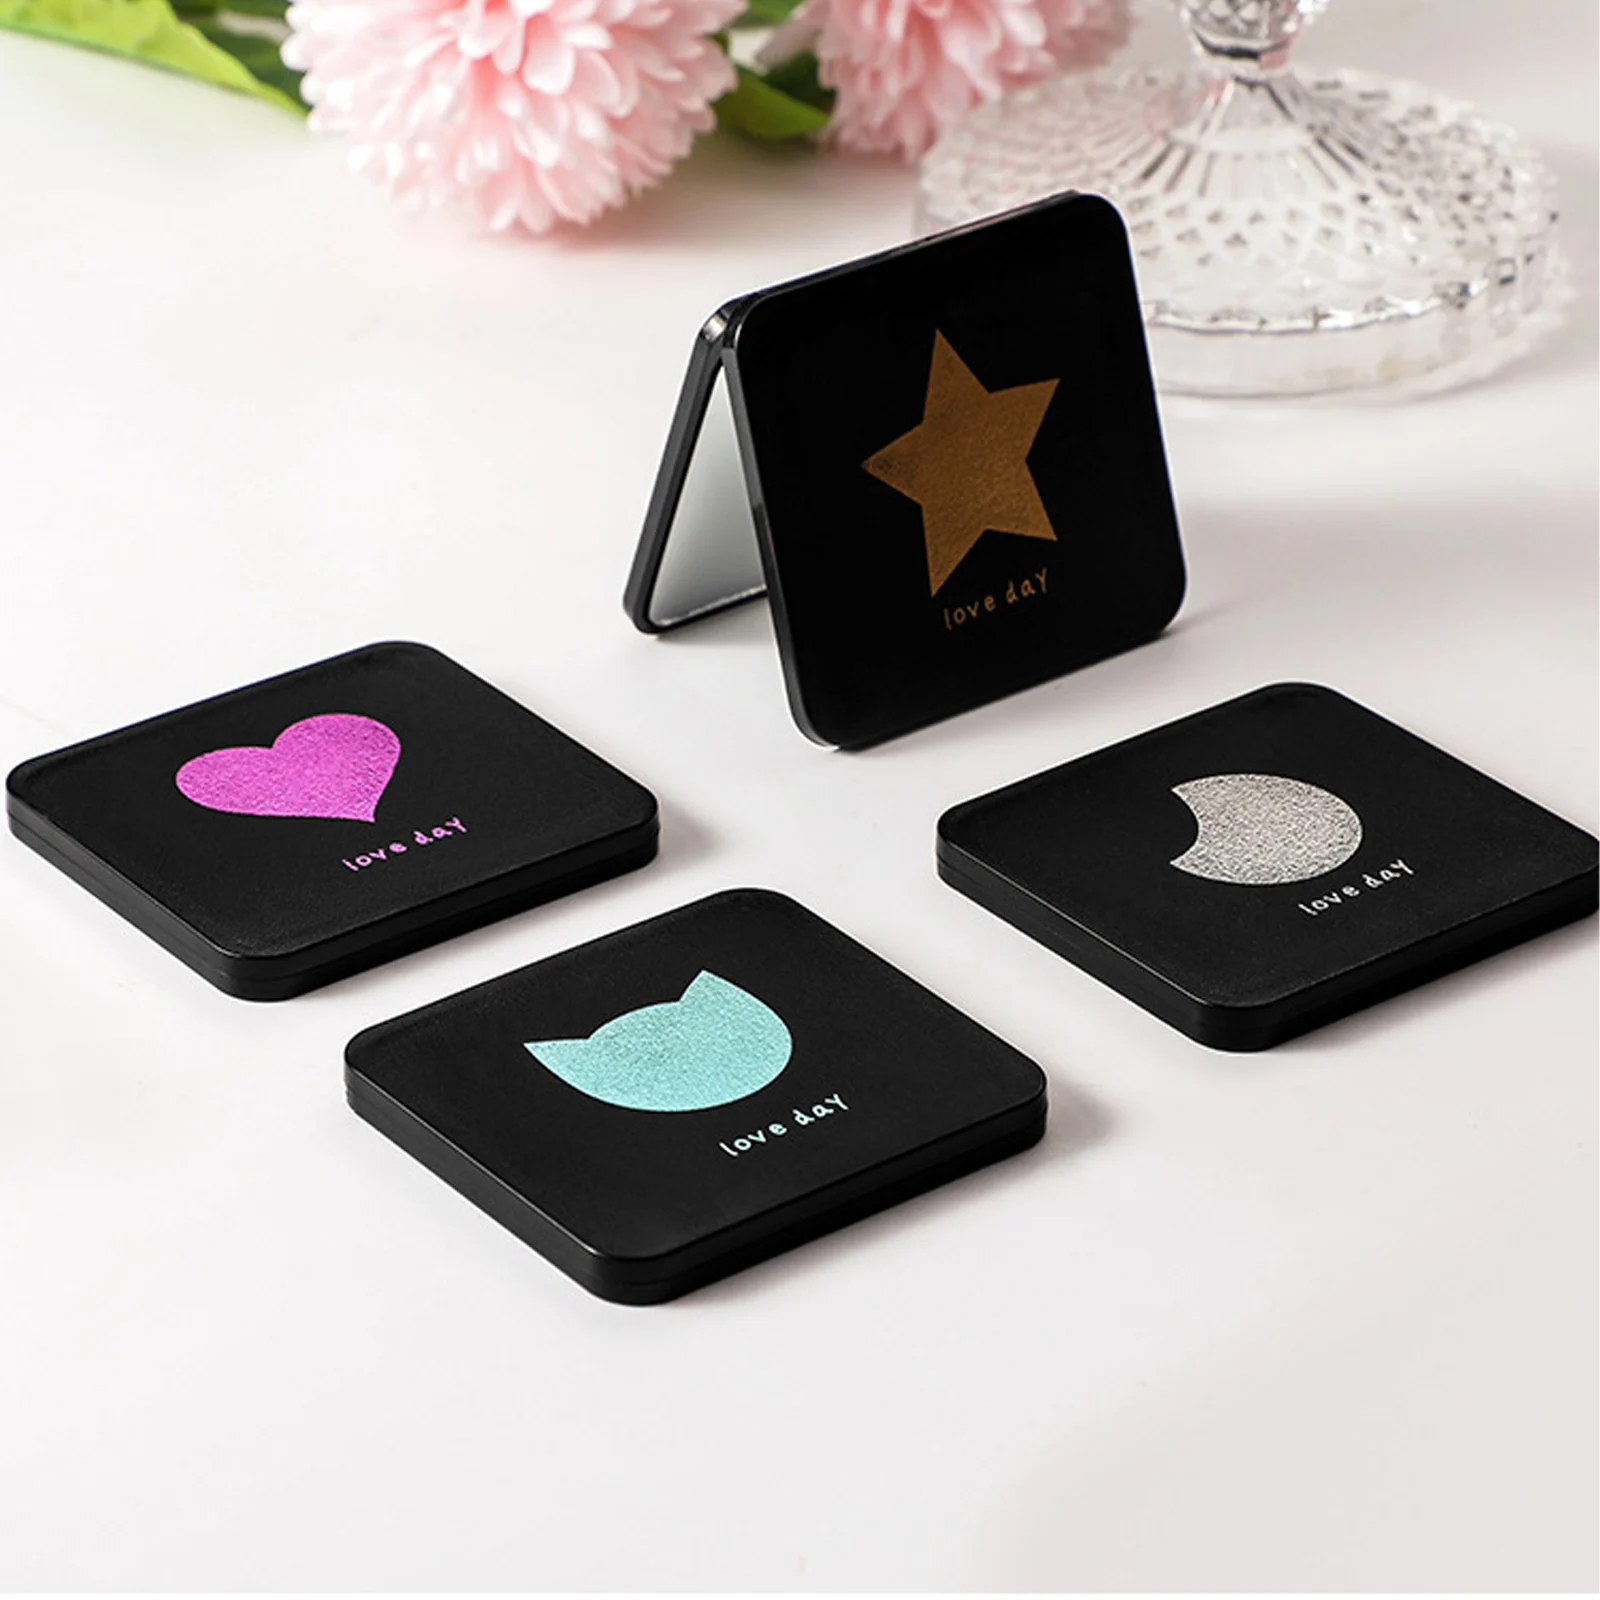 Mini Double Sided Makeup Mirror Folding Compact Mirror Female Portable Travel Square Handheld Pocket Mirror Makeup Accessories european and american woven headband headband sweet sen female wild wide sided personality net red headband